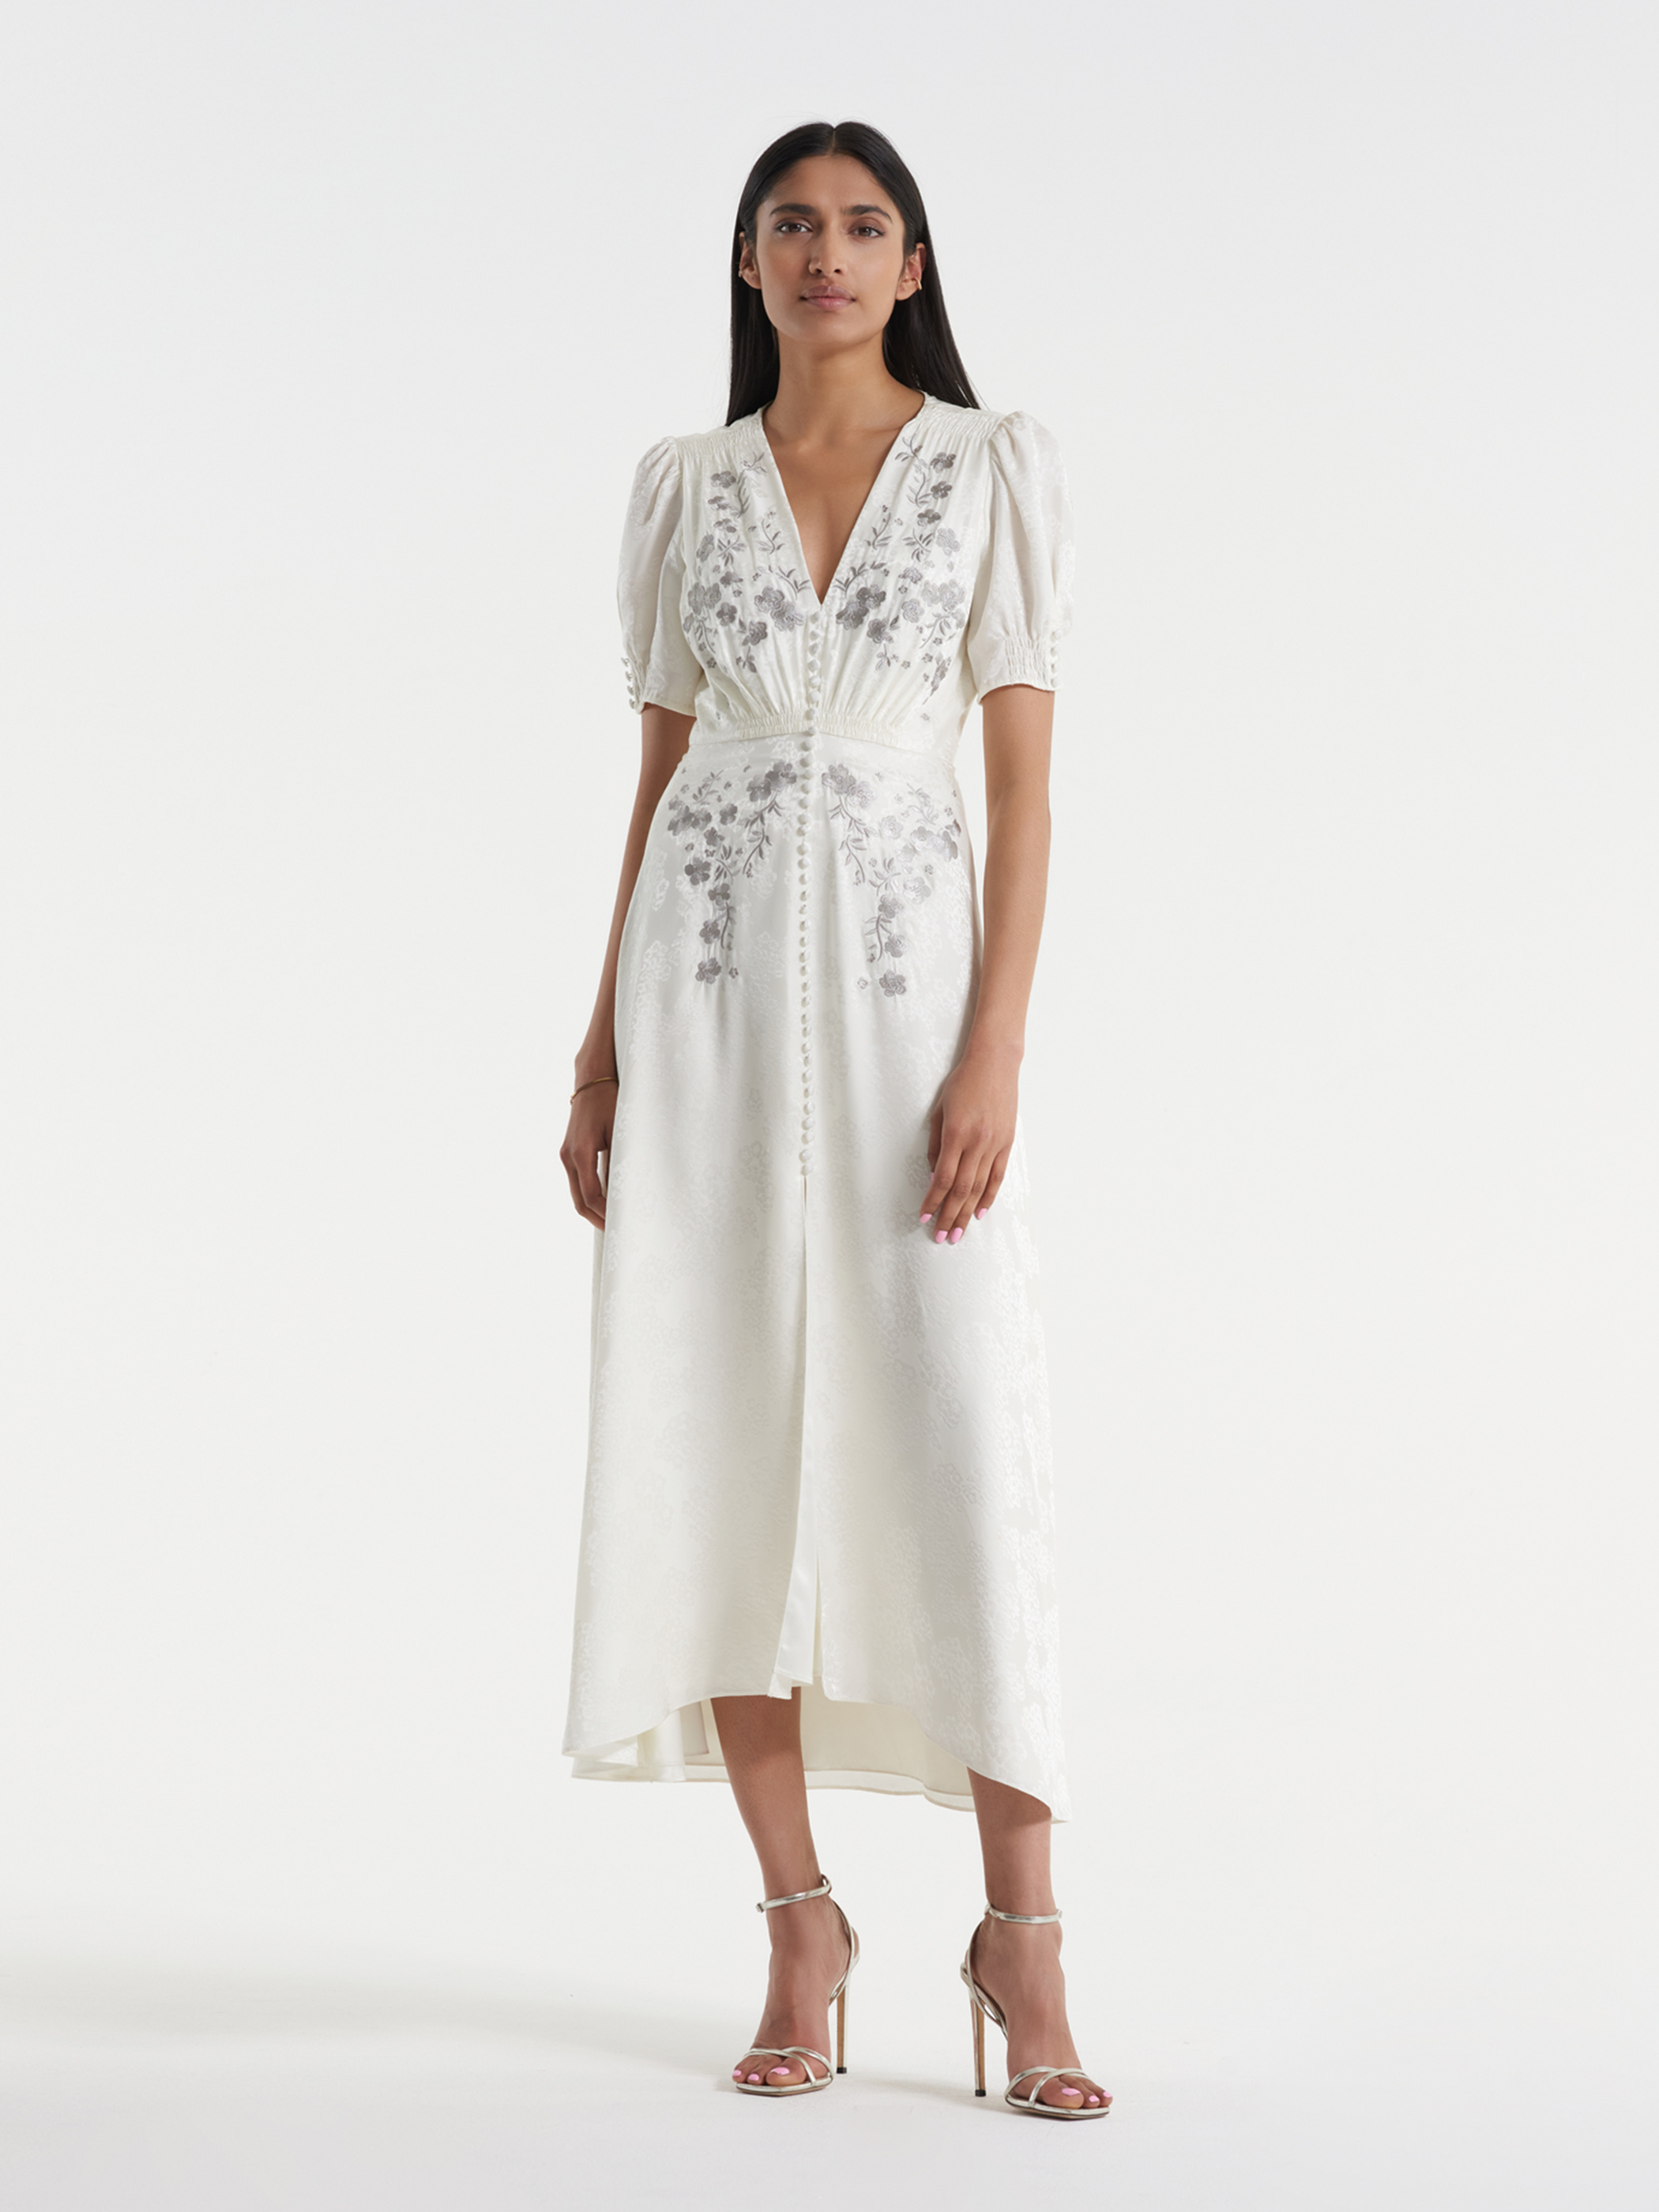 Lea Long Dress in Ivory Silver Embroidery